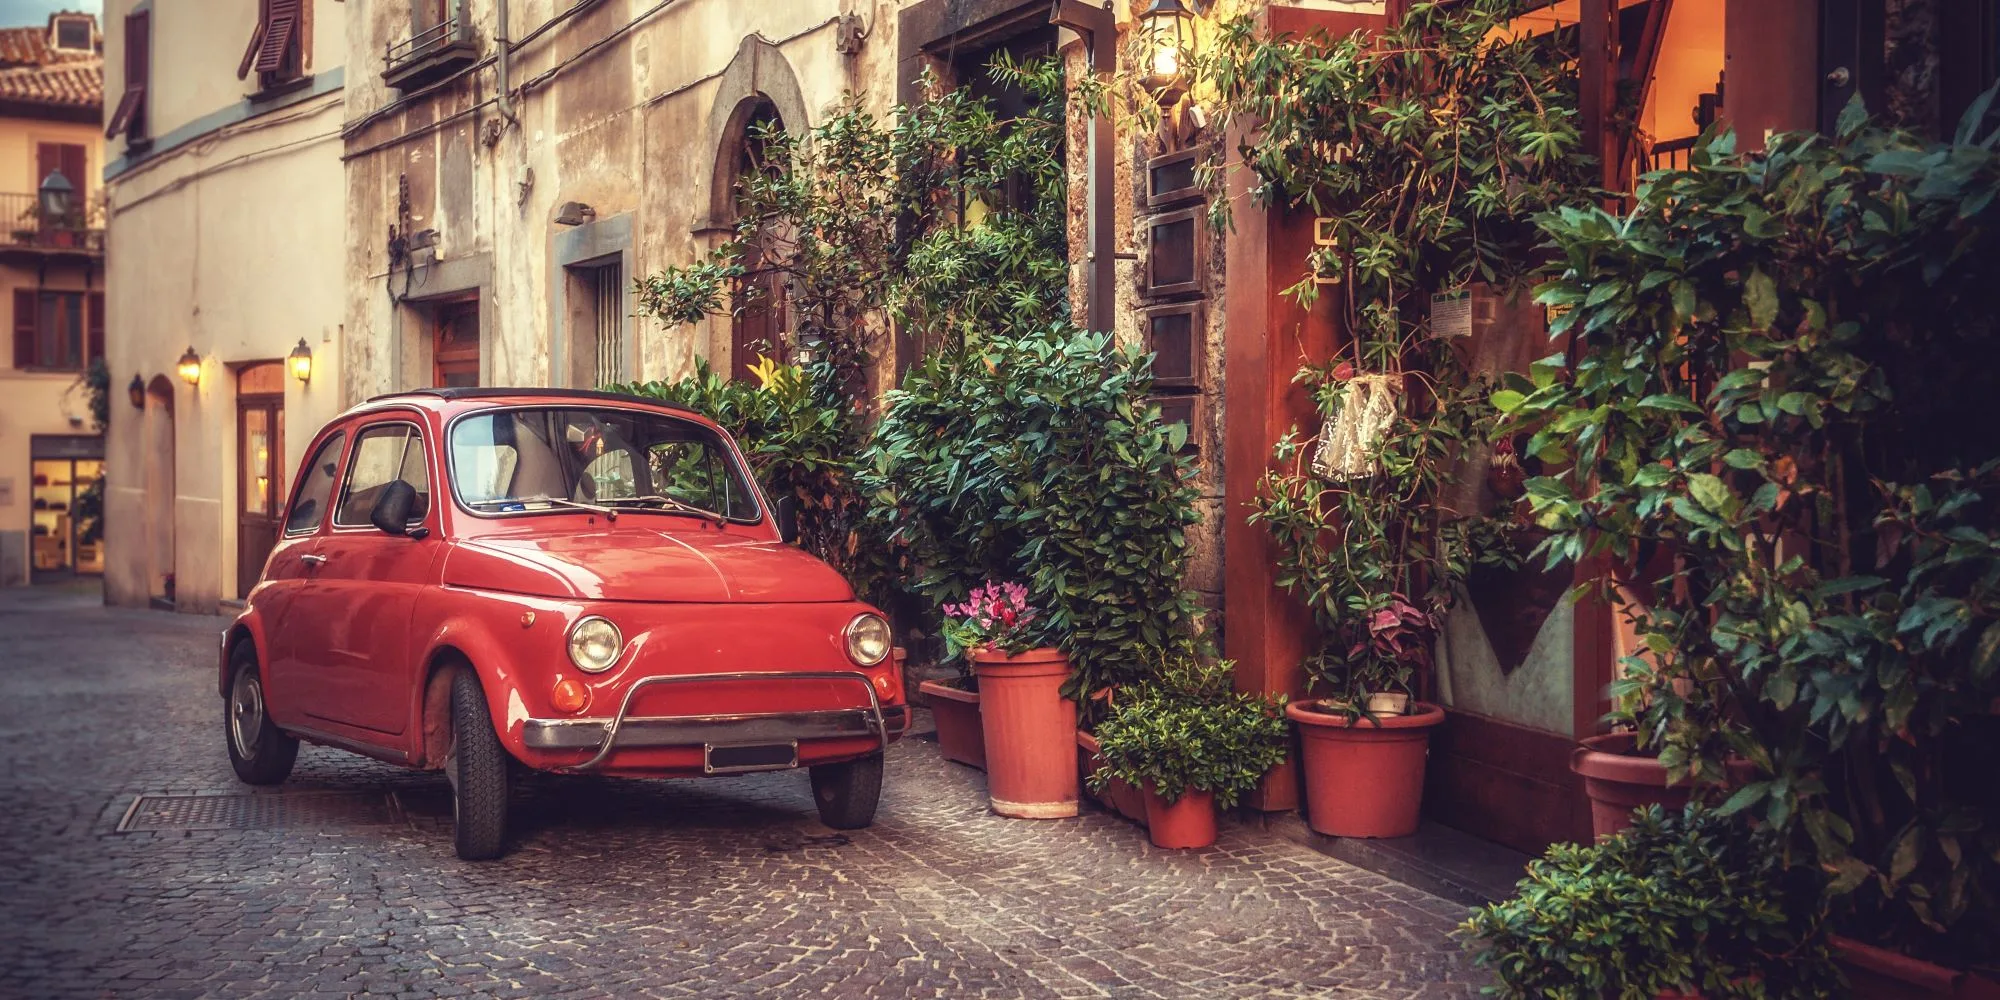 A red fiat on a cobbled street in Italy.